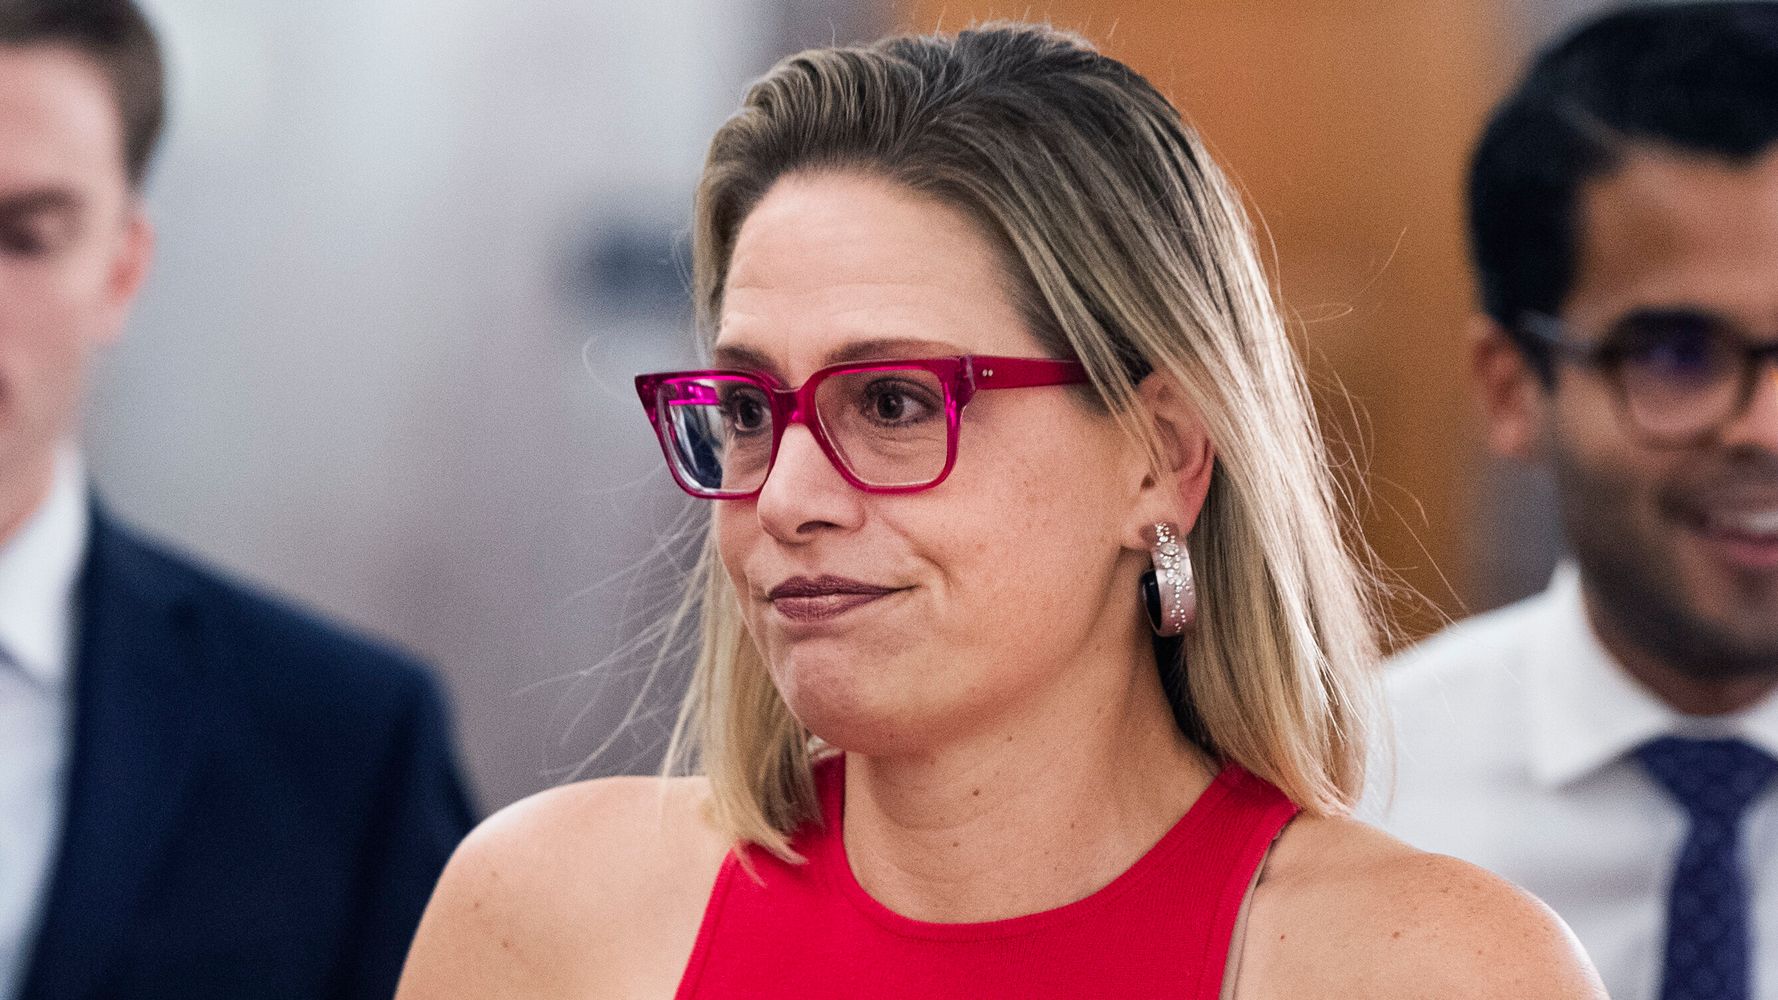 Kyrsten Sinema’s Filibuster Stand: If Democrats Pass Bills, GOP Can Just Overturn Them Later